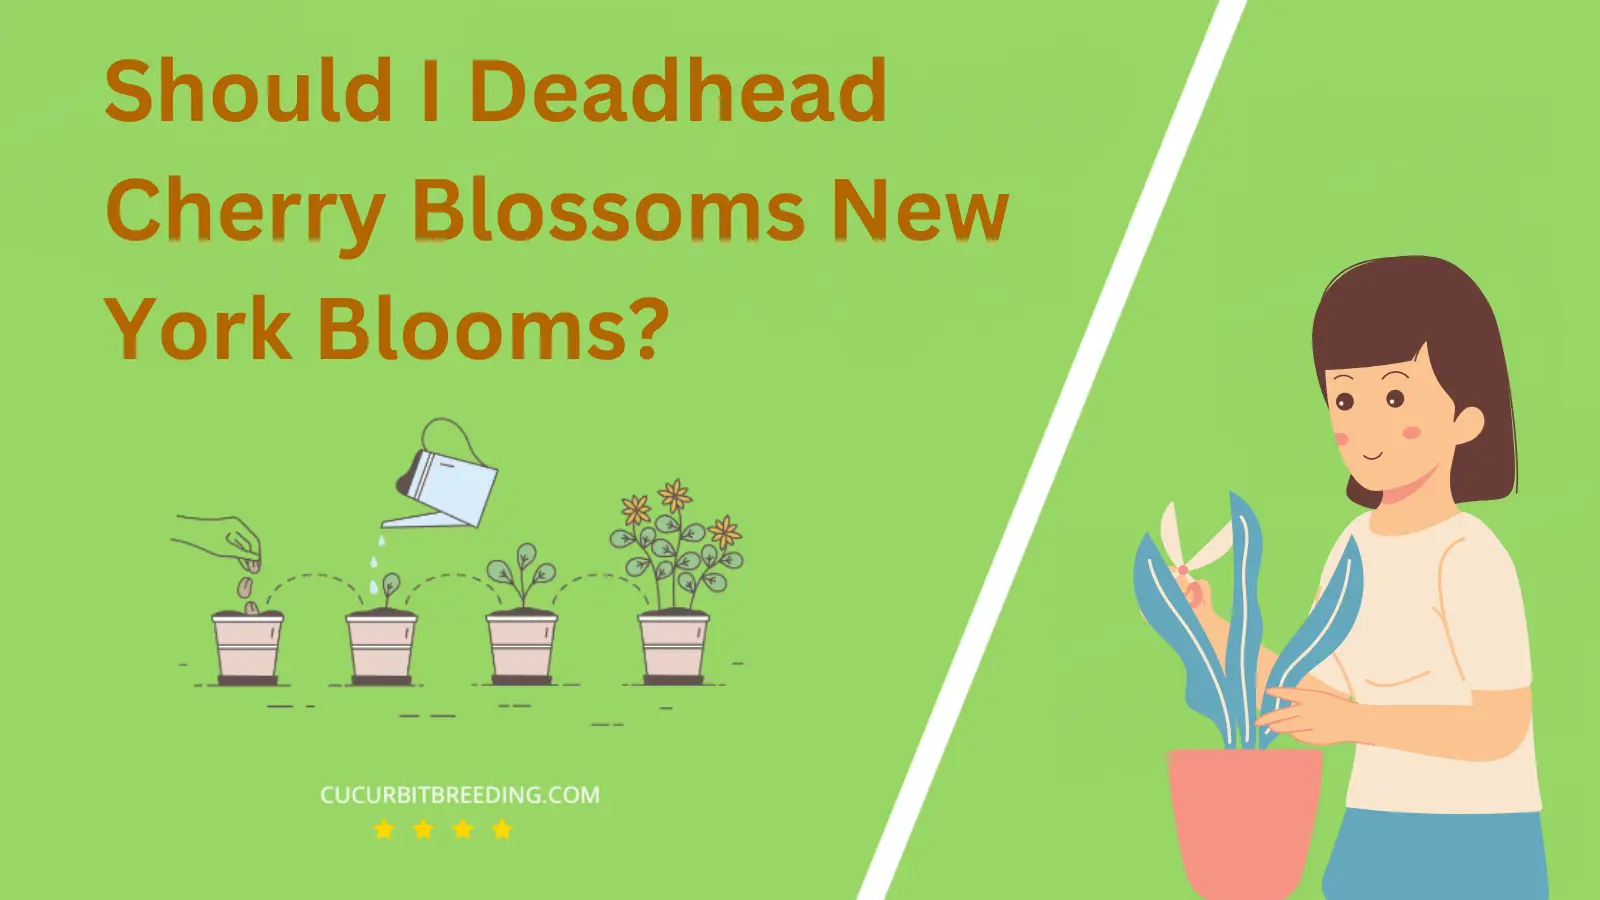 Should I Deadhead Cherry Blossoms New York Blooms?